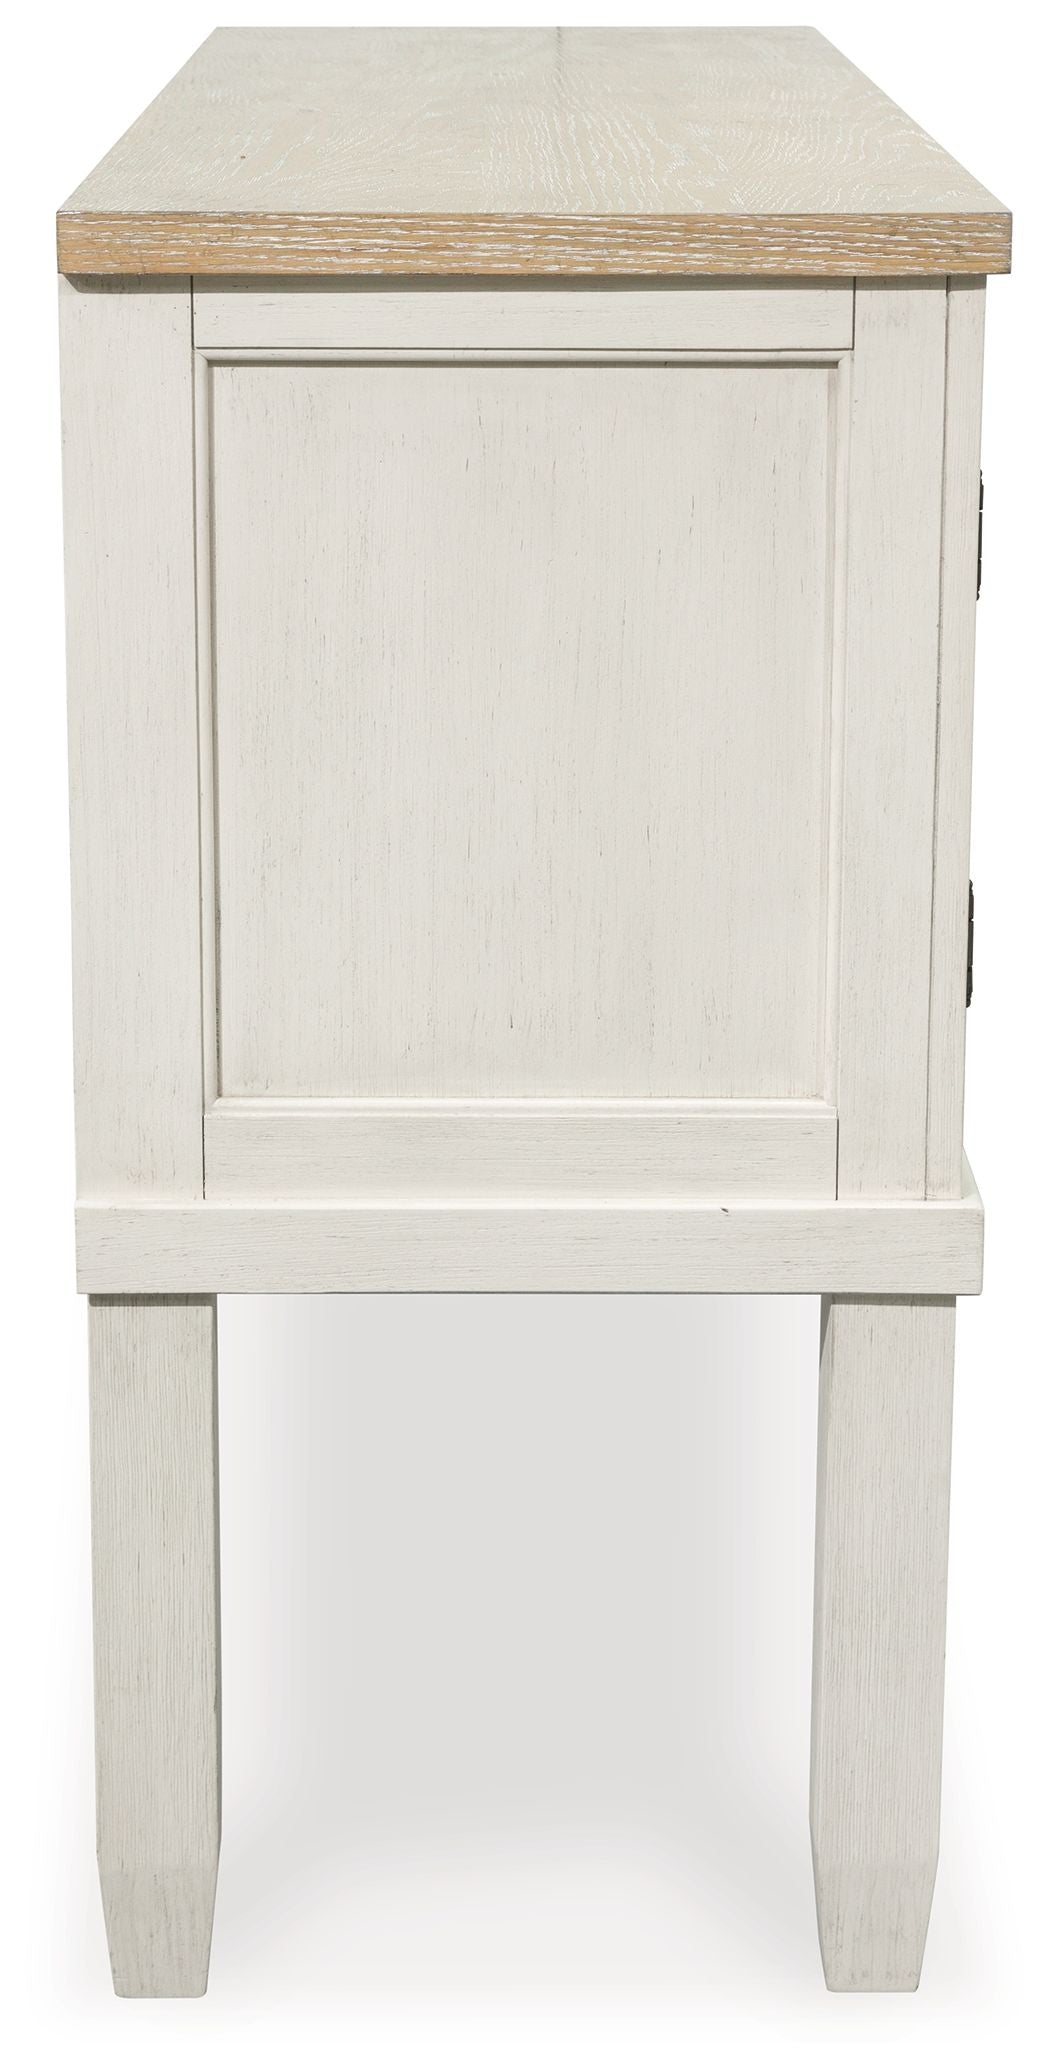 Shaybrock - Antique White / Brown - Dining Room Server - Tony's Home Furnishings